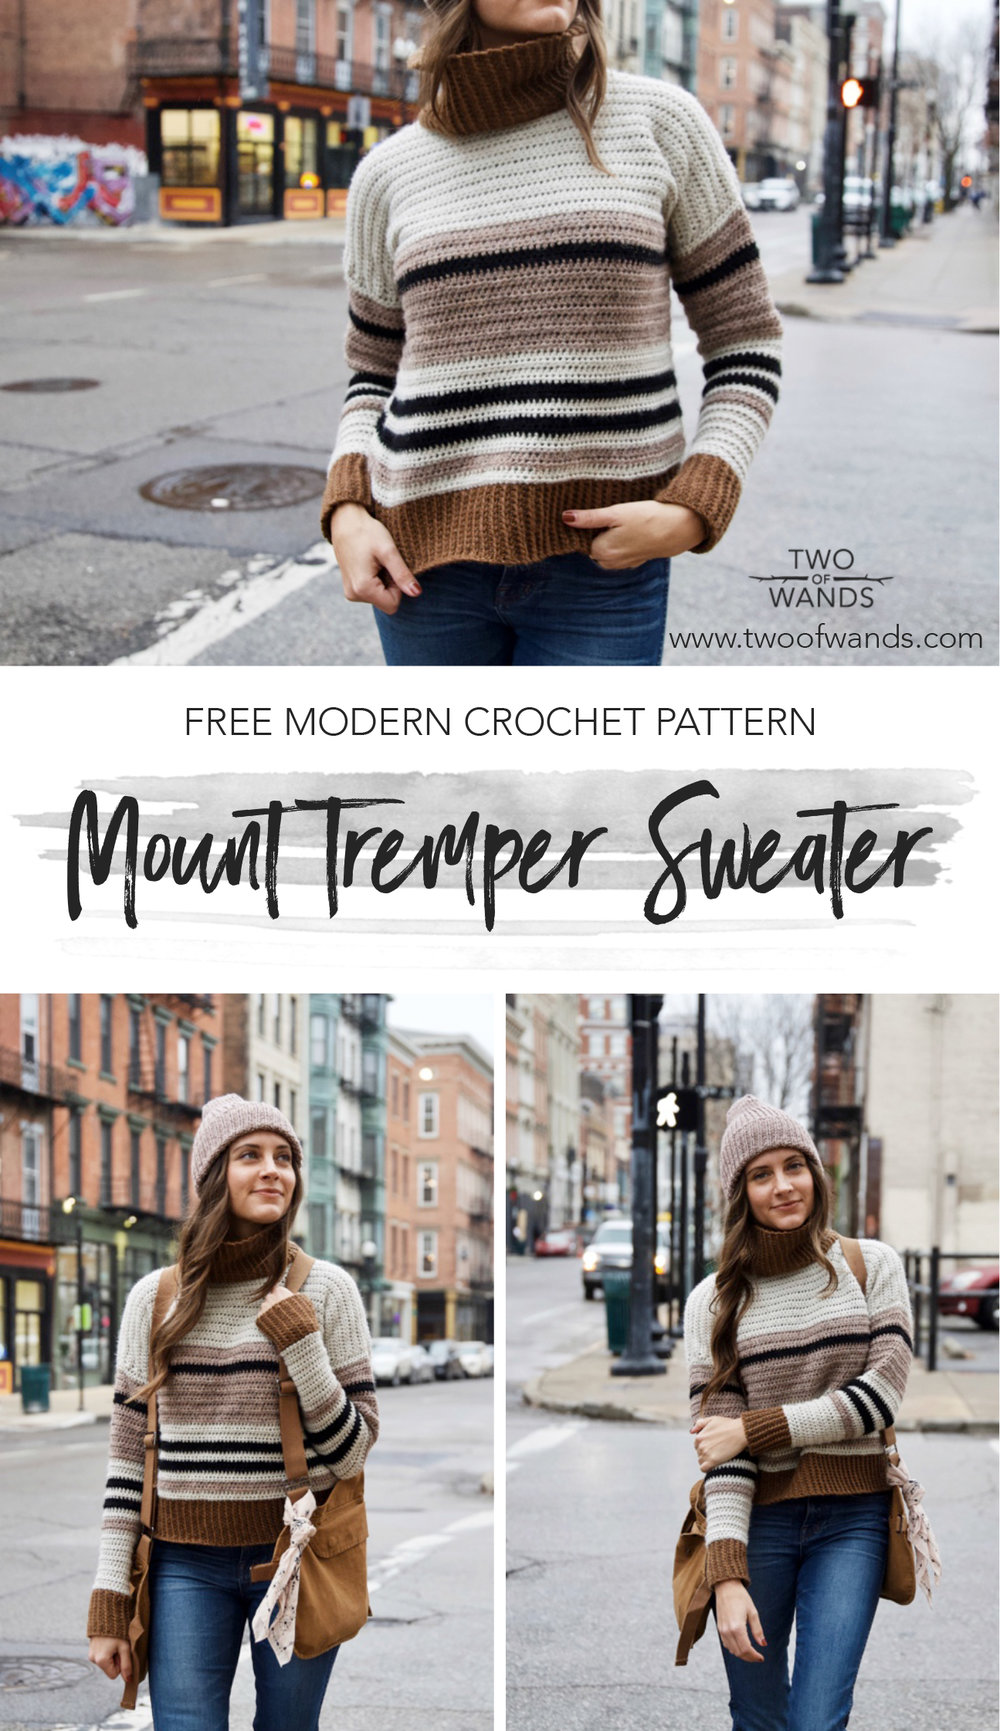 Mount Tremper Sweater pattern by Two of Wands